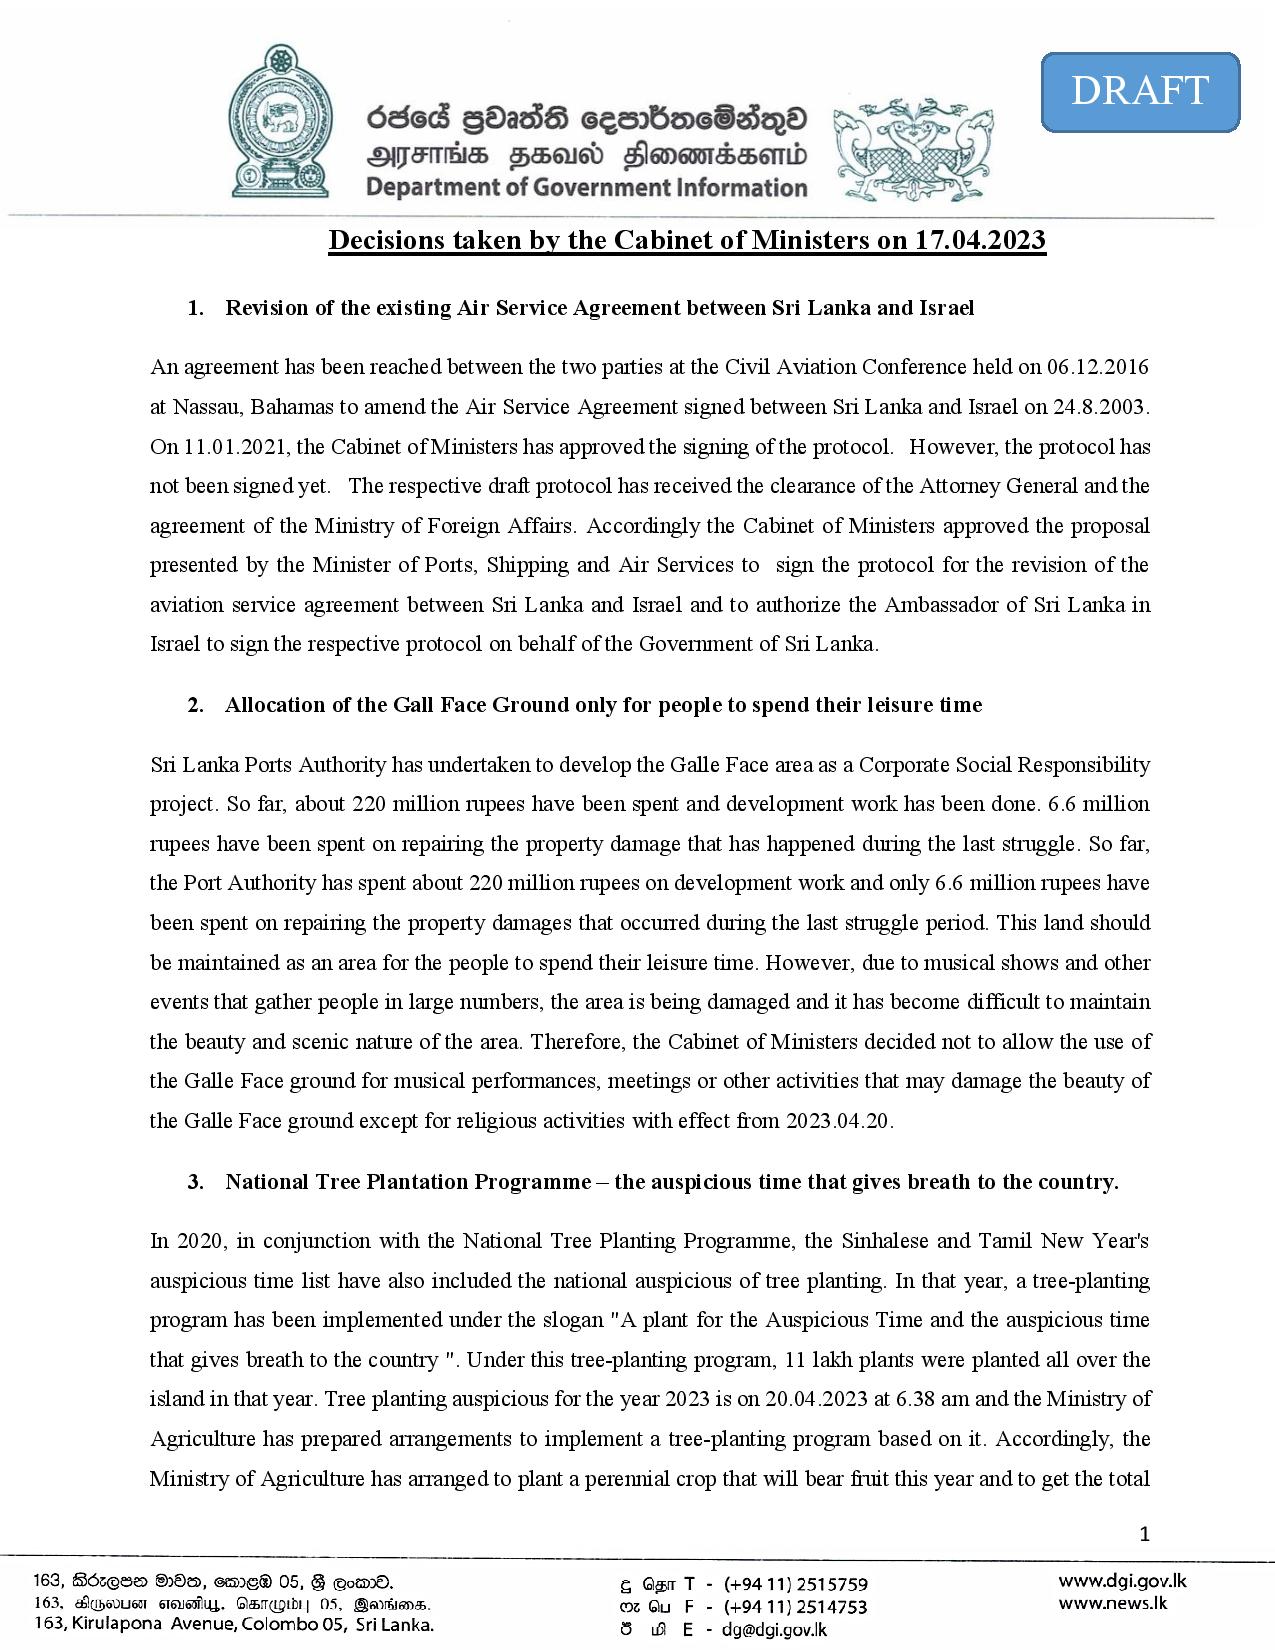 Cabinet Decisions on 17.04.2023 English page 001